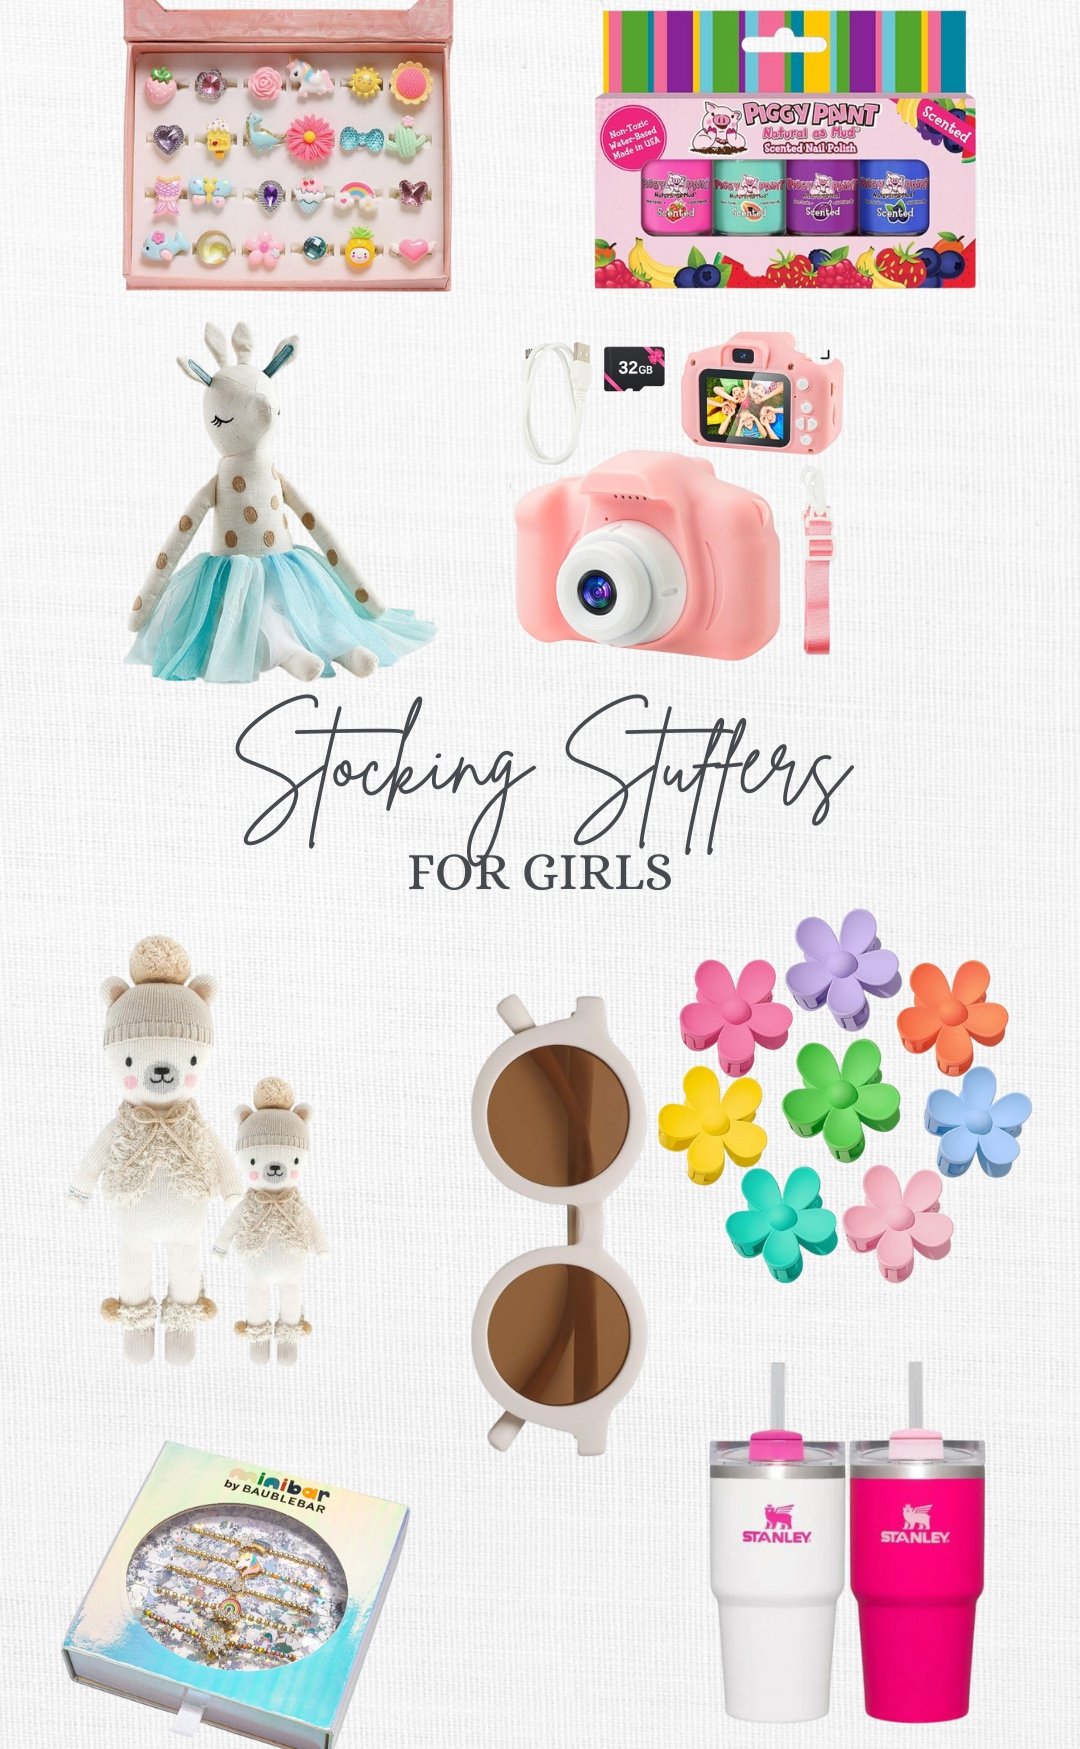 want, need, wear, read: the gift guide for 5 year old girls - trista  peterson